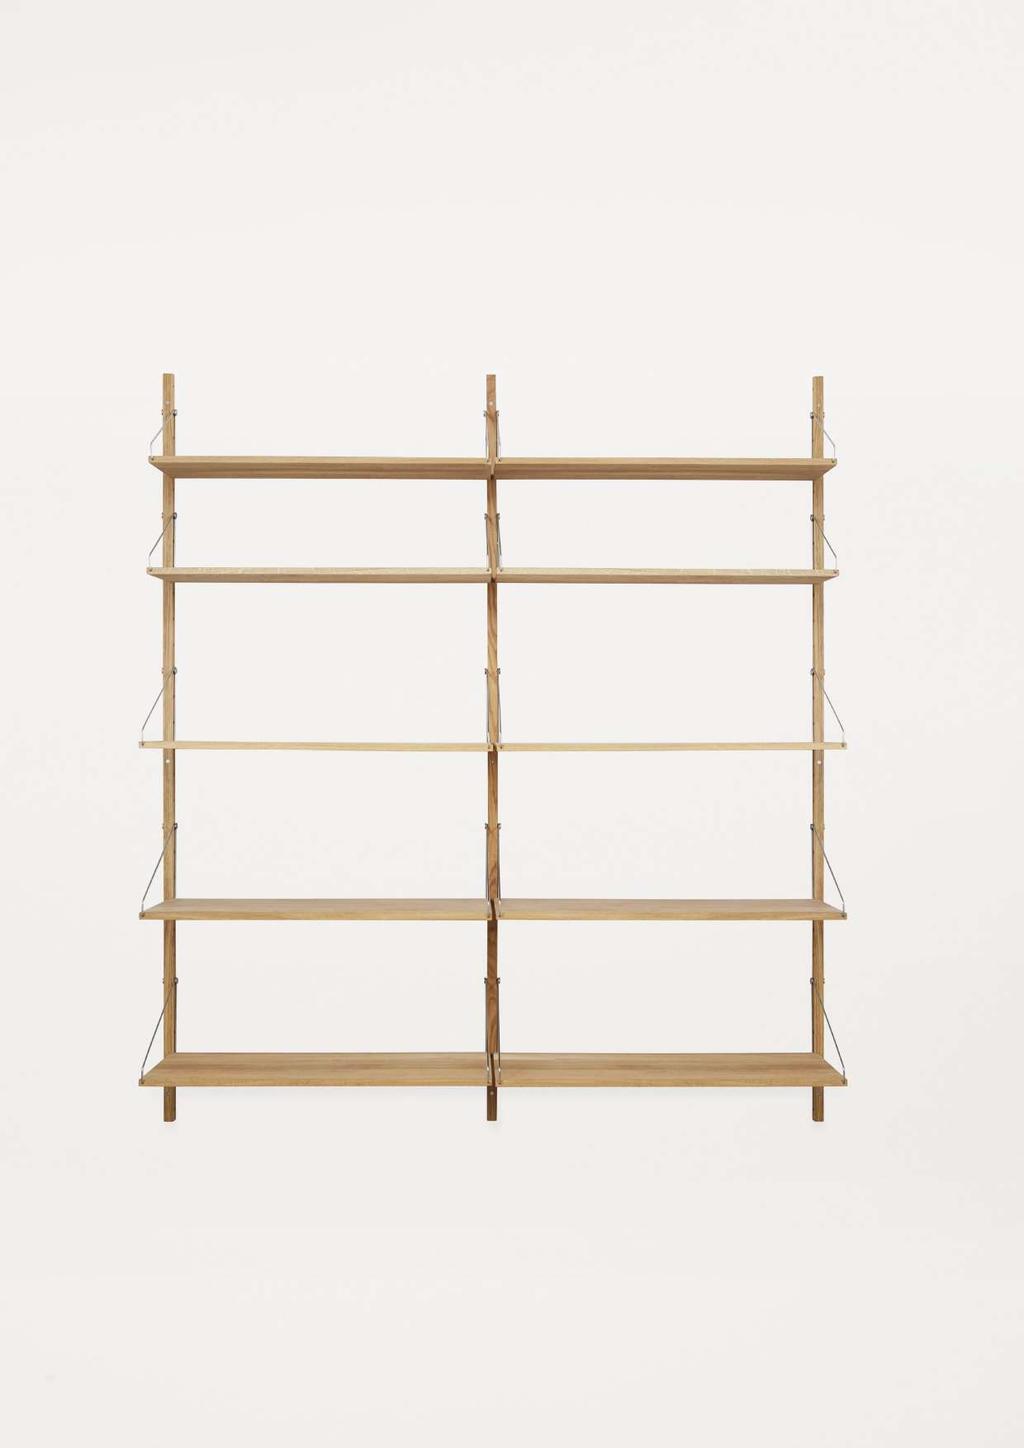 850 290 850 290 1850 1148 library size 1 library size 2 includes: 2 1850 rails 3 D27 L800 shelves 2 D20 L800 shelves includes: 2 1148 rails 2 D27 L800 shelves 2 D20 L800 shelves SHELF LIBRARY NATURAL